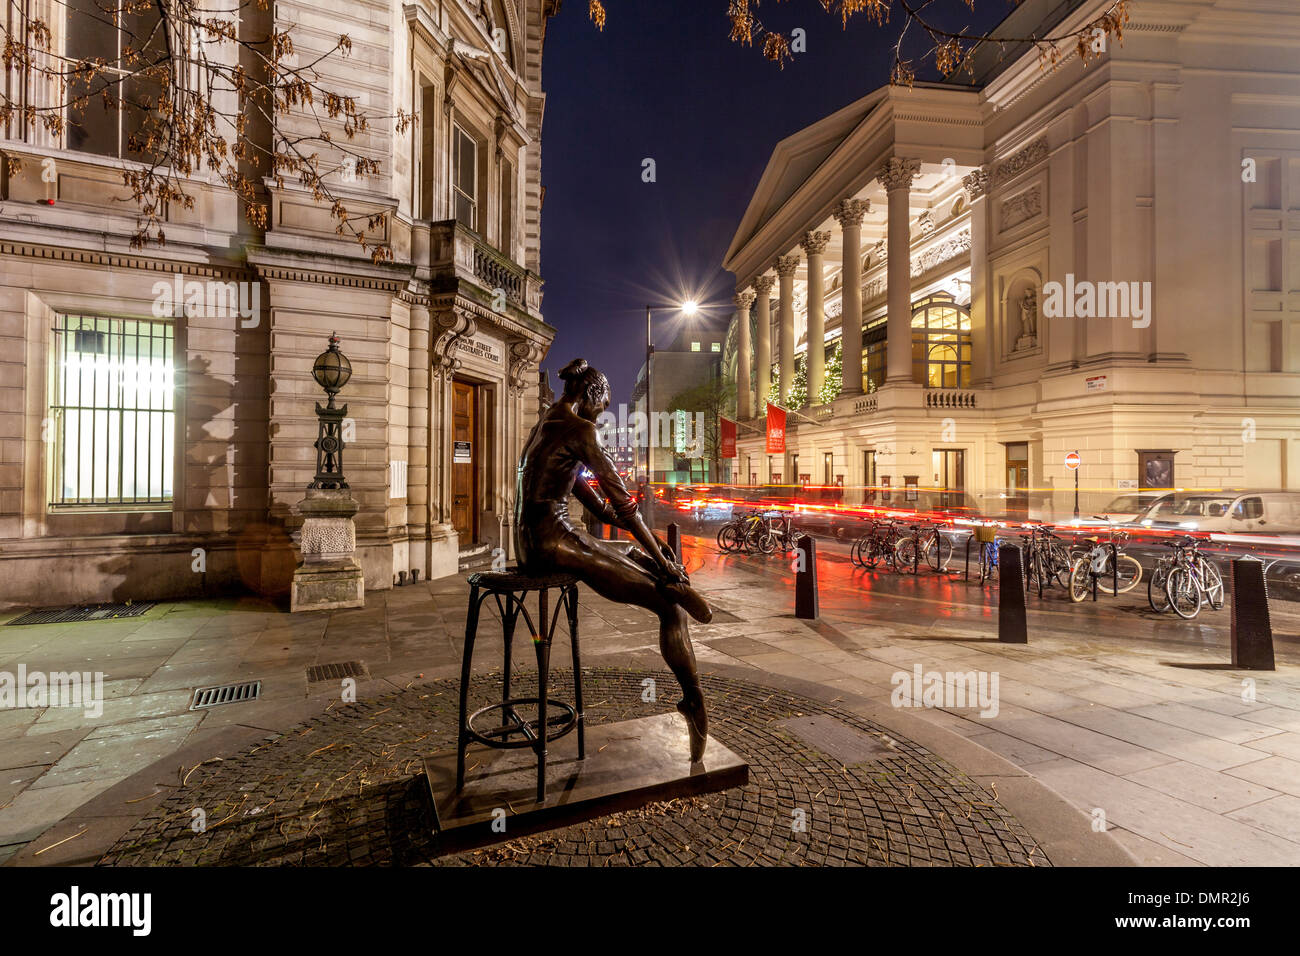 The Royal Opera House & Young Dancer Statue, Covent Garden, London, England Stock Photo